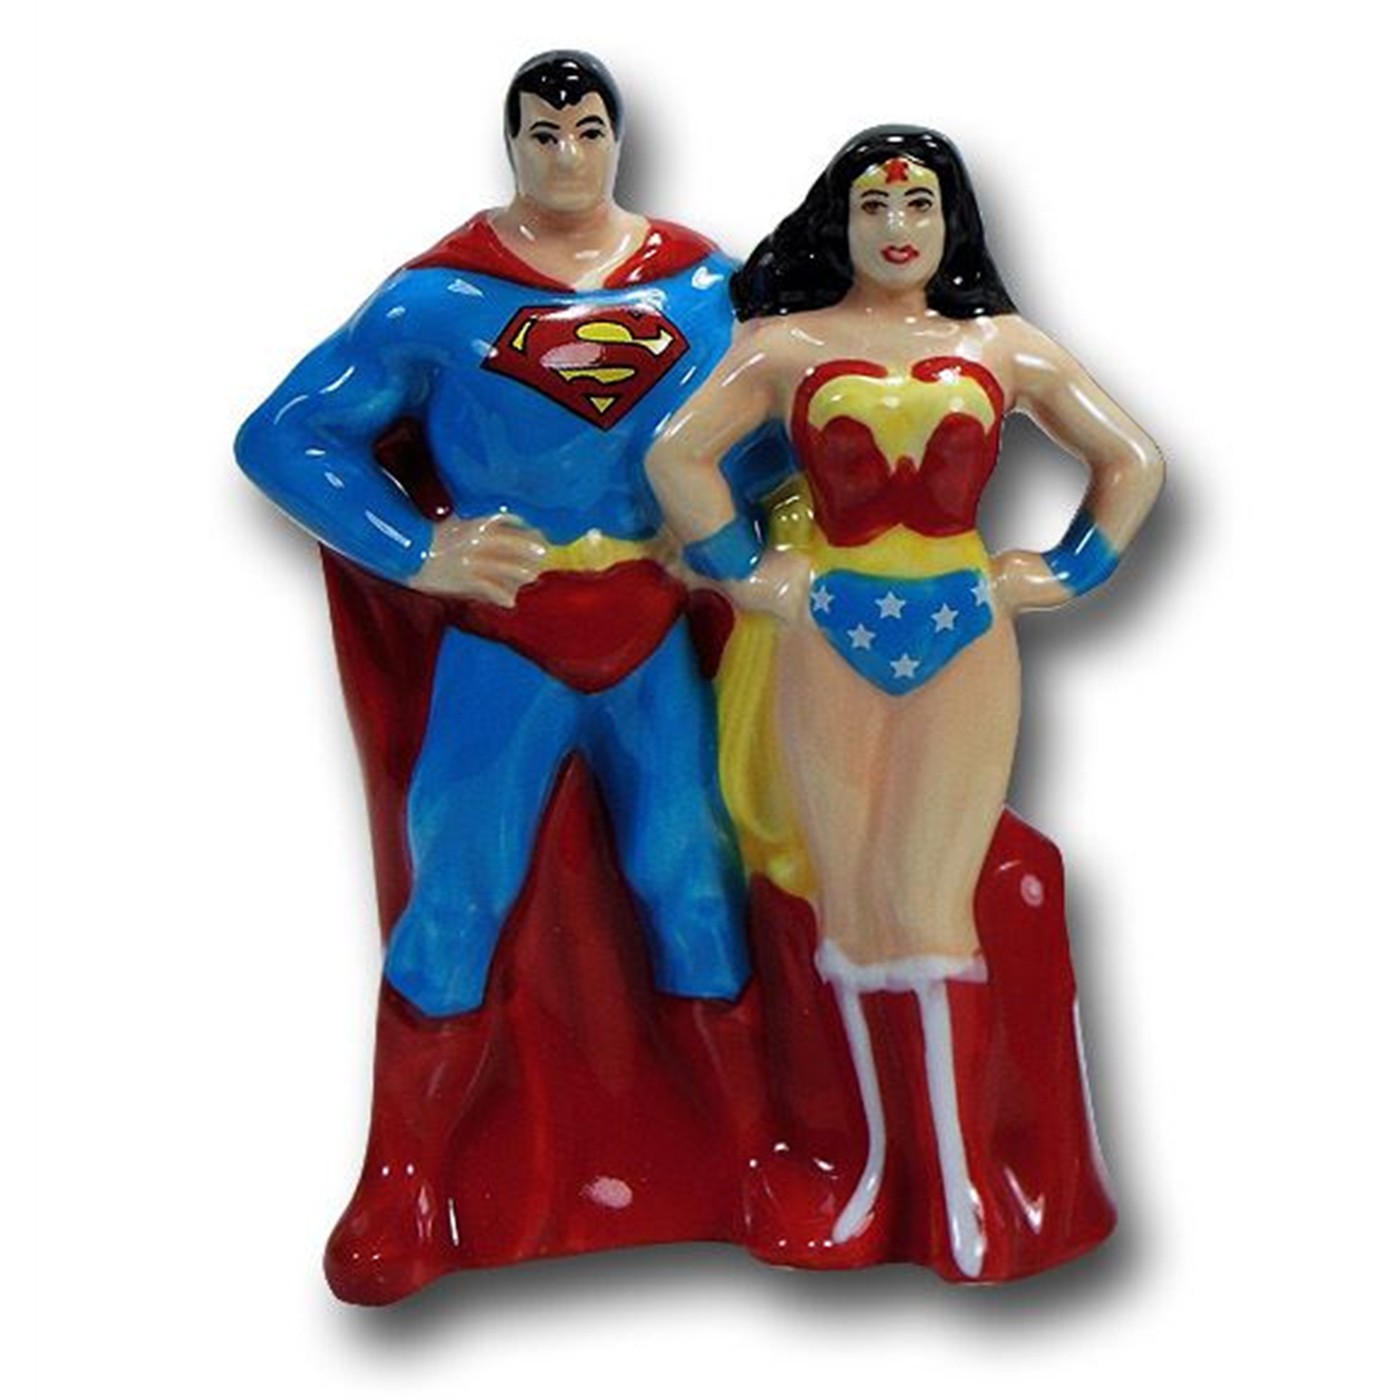 DC Heroes Salt and Pepper Shakers